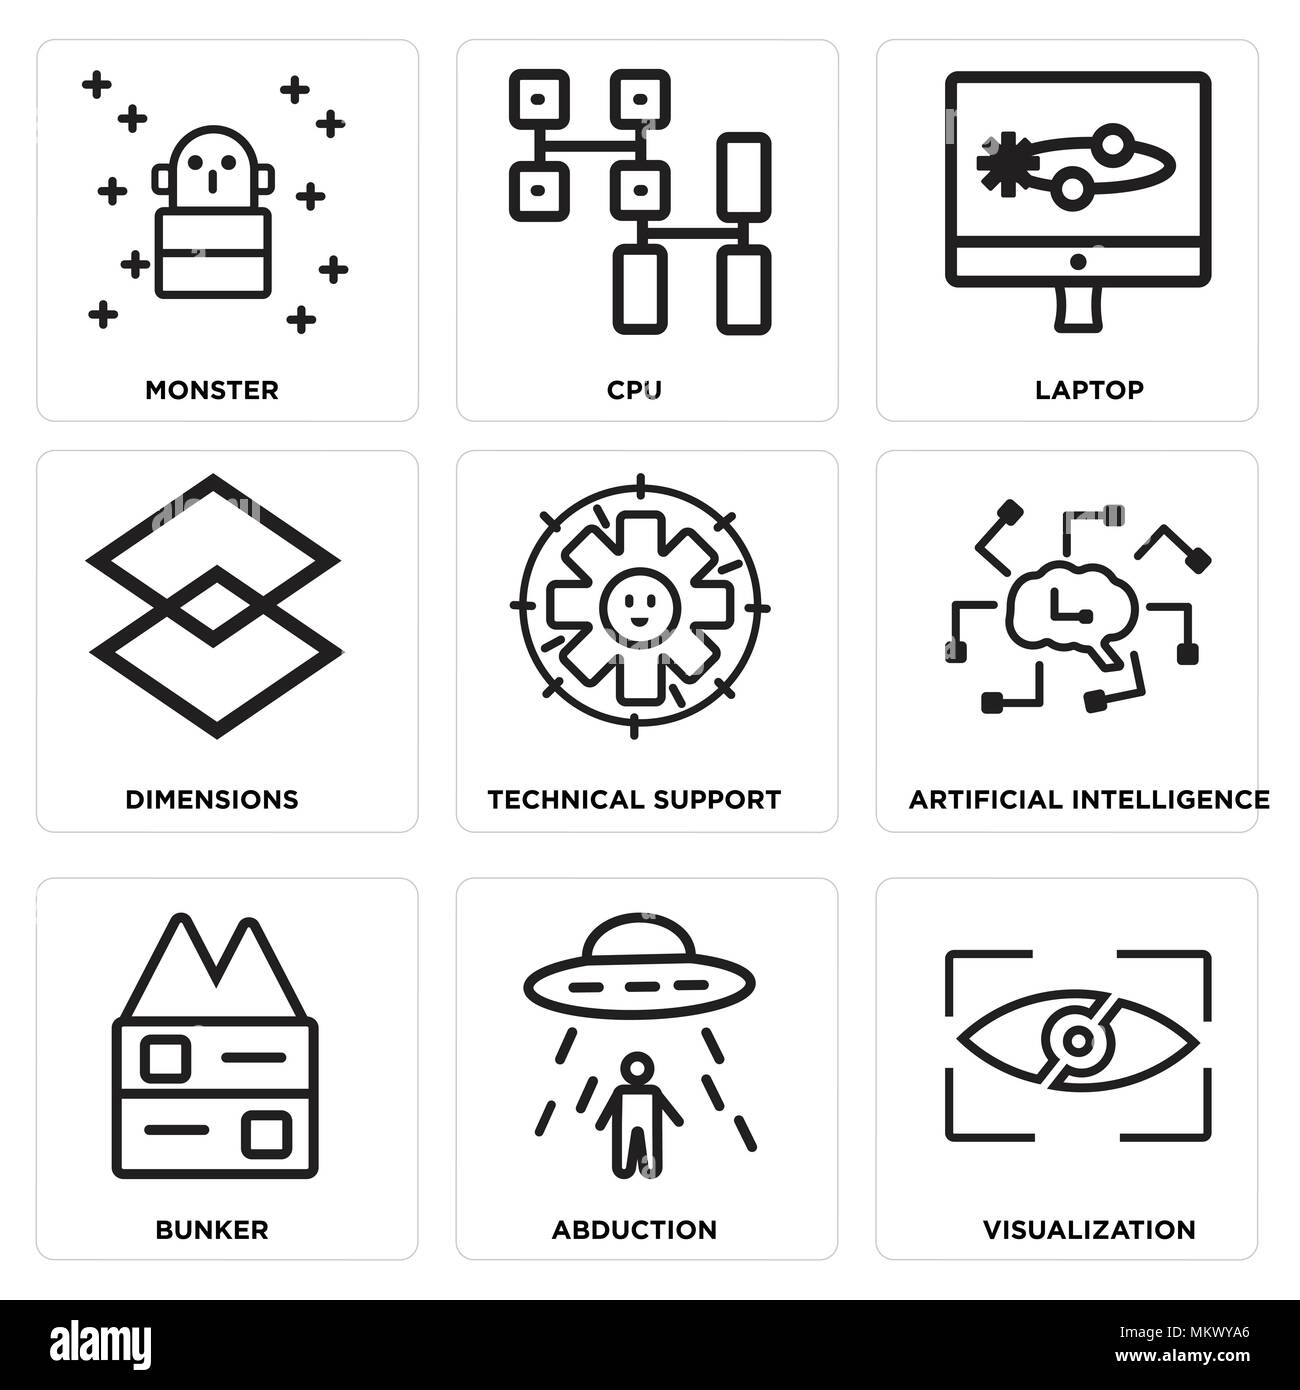 Set Of 9 simple editable icons such as Visualization, Abduction, Bunker, Artificial intelligence, Technical Support, Dimensions, Laptop, Cpu, Monster, Stock Vector